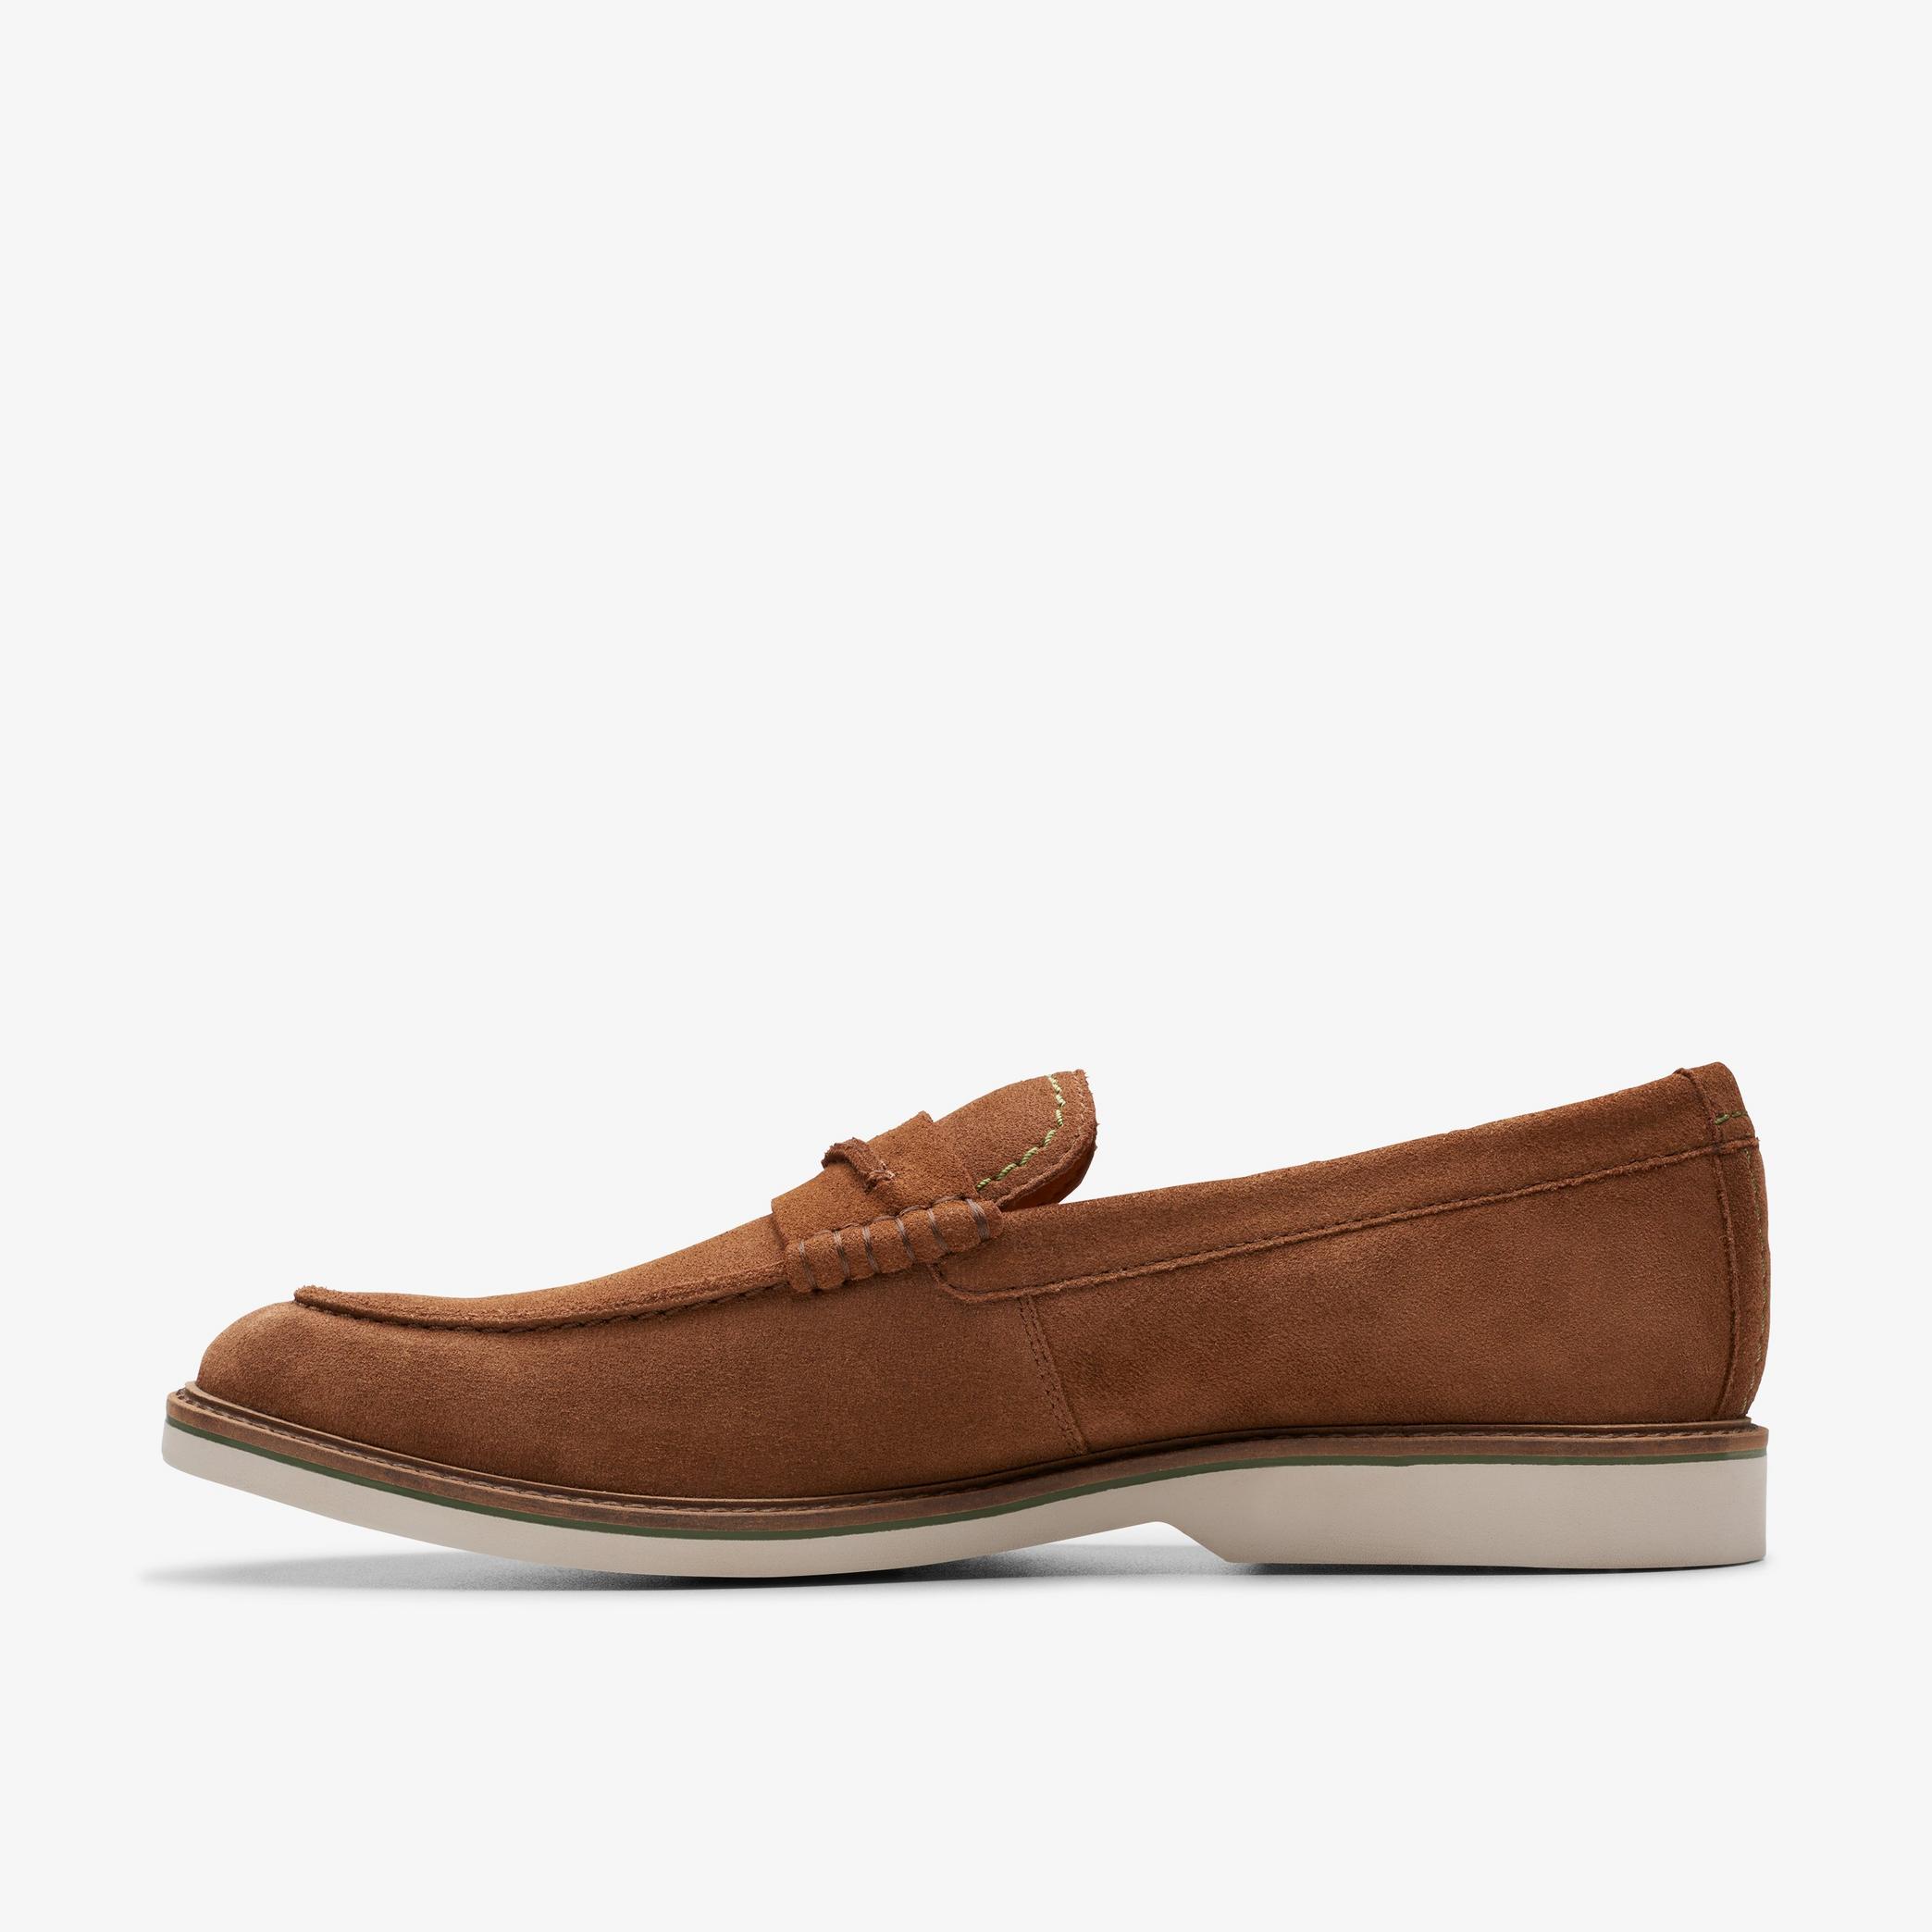 Atticus LT Slip Cola Suede Loafers, view 2 of 7